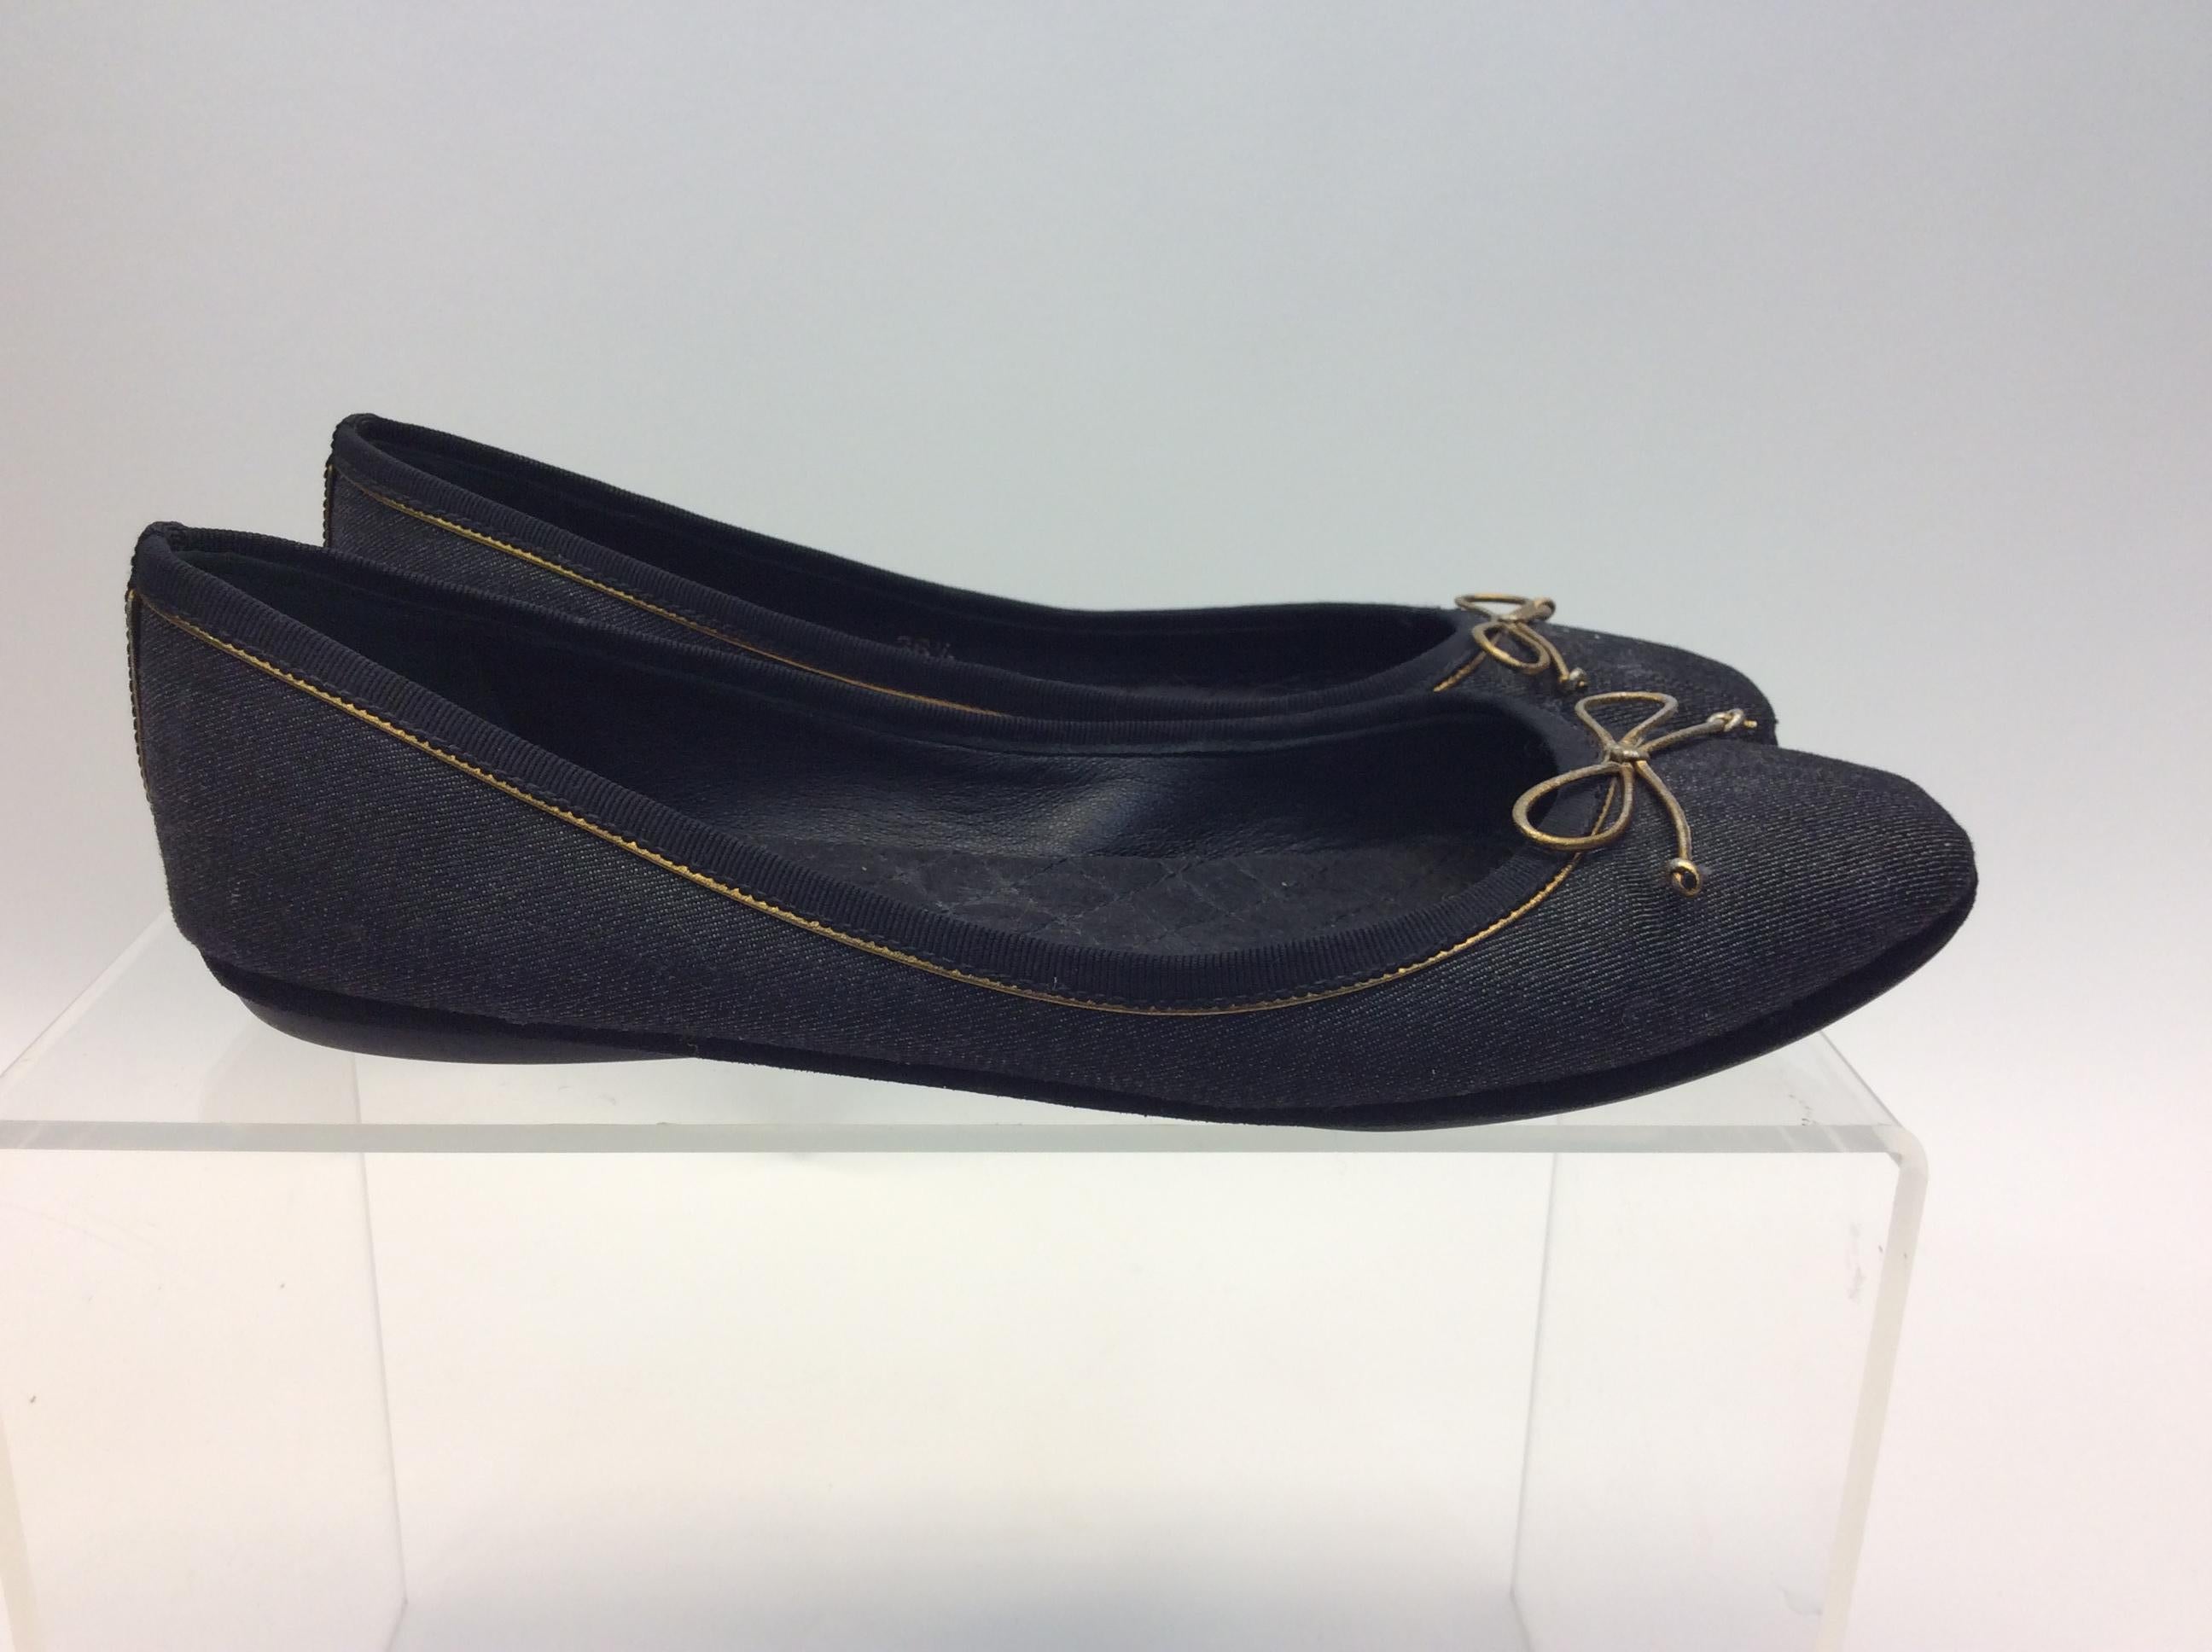 Yves Saint Laurent Black Ballet Flats In Good Condition For Sale In Narberth, PA